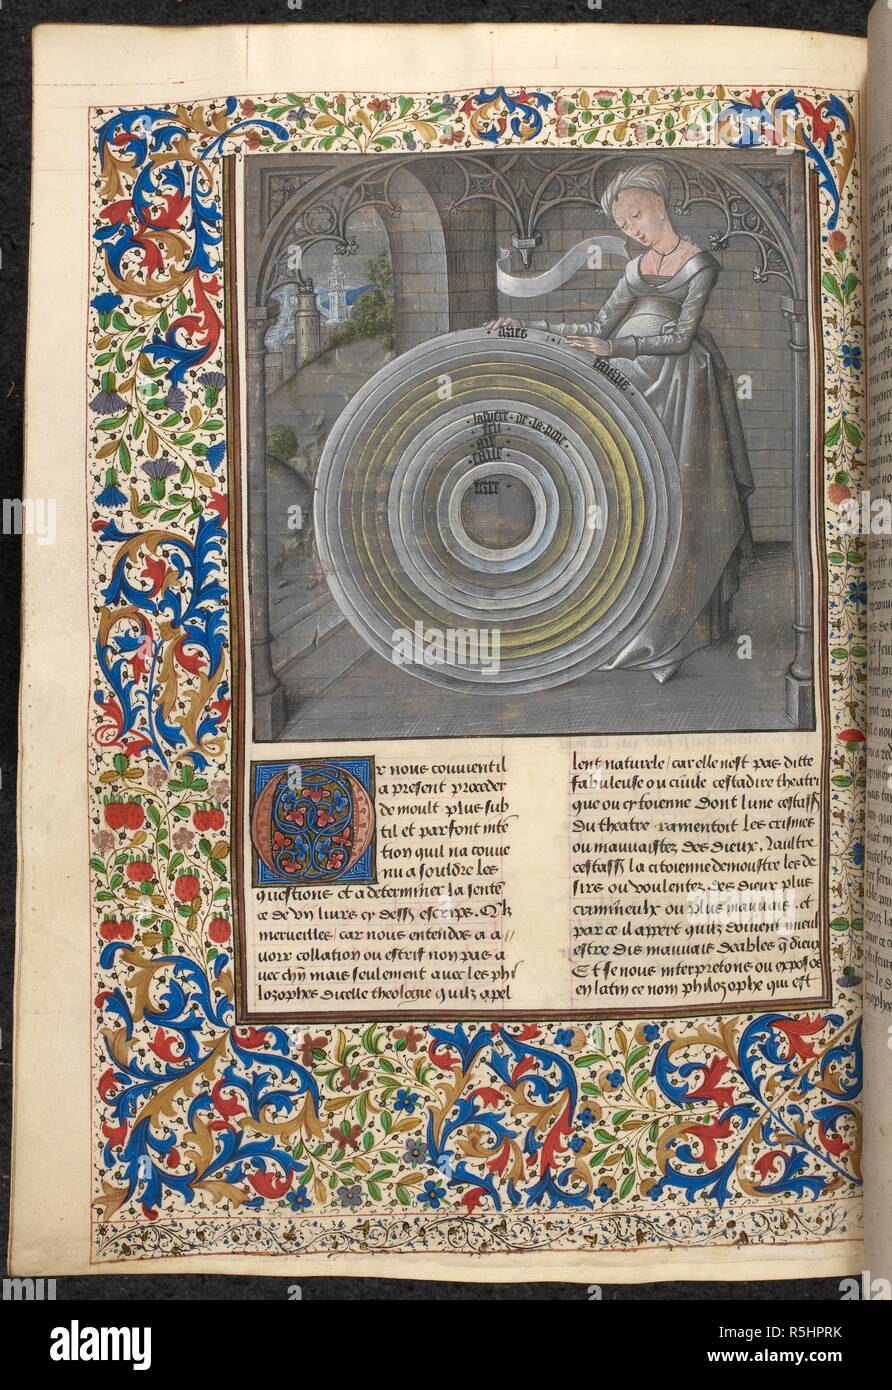 Philosophy holding the spheres. S. AUGUSTINE, De civitate Dei, in French: the translation and commentary made by Raoul de Presles for Charles V of France. Late 15th century. Source: Royal 14 D. I f.337v. Language: French. Author: de Presles, Raoul (Translator). Stock Photo